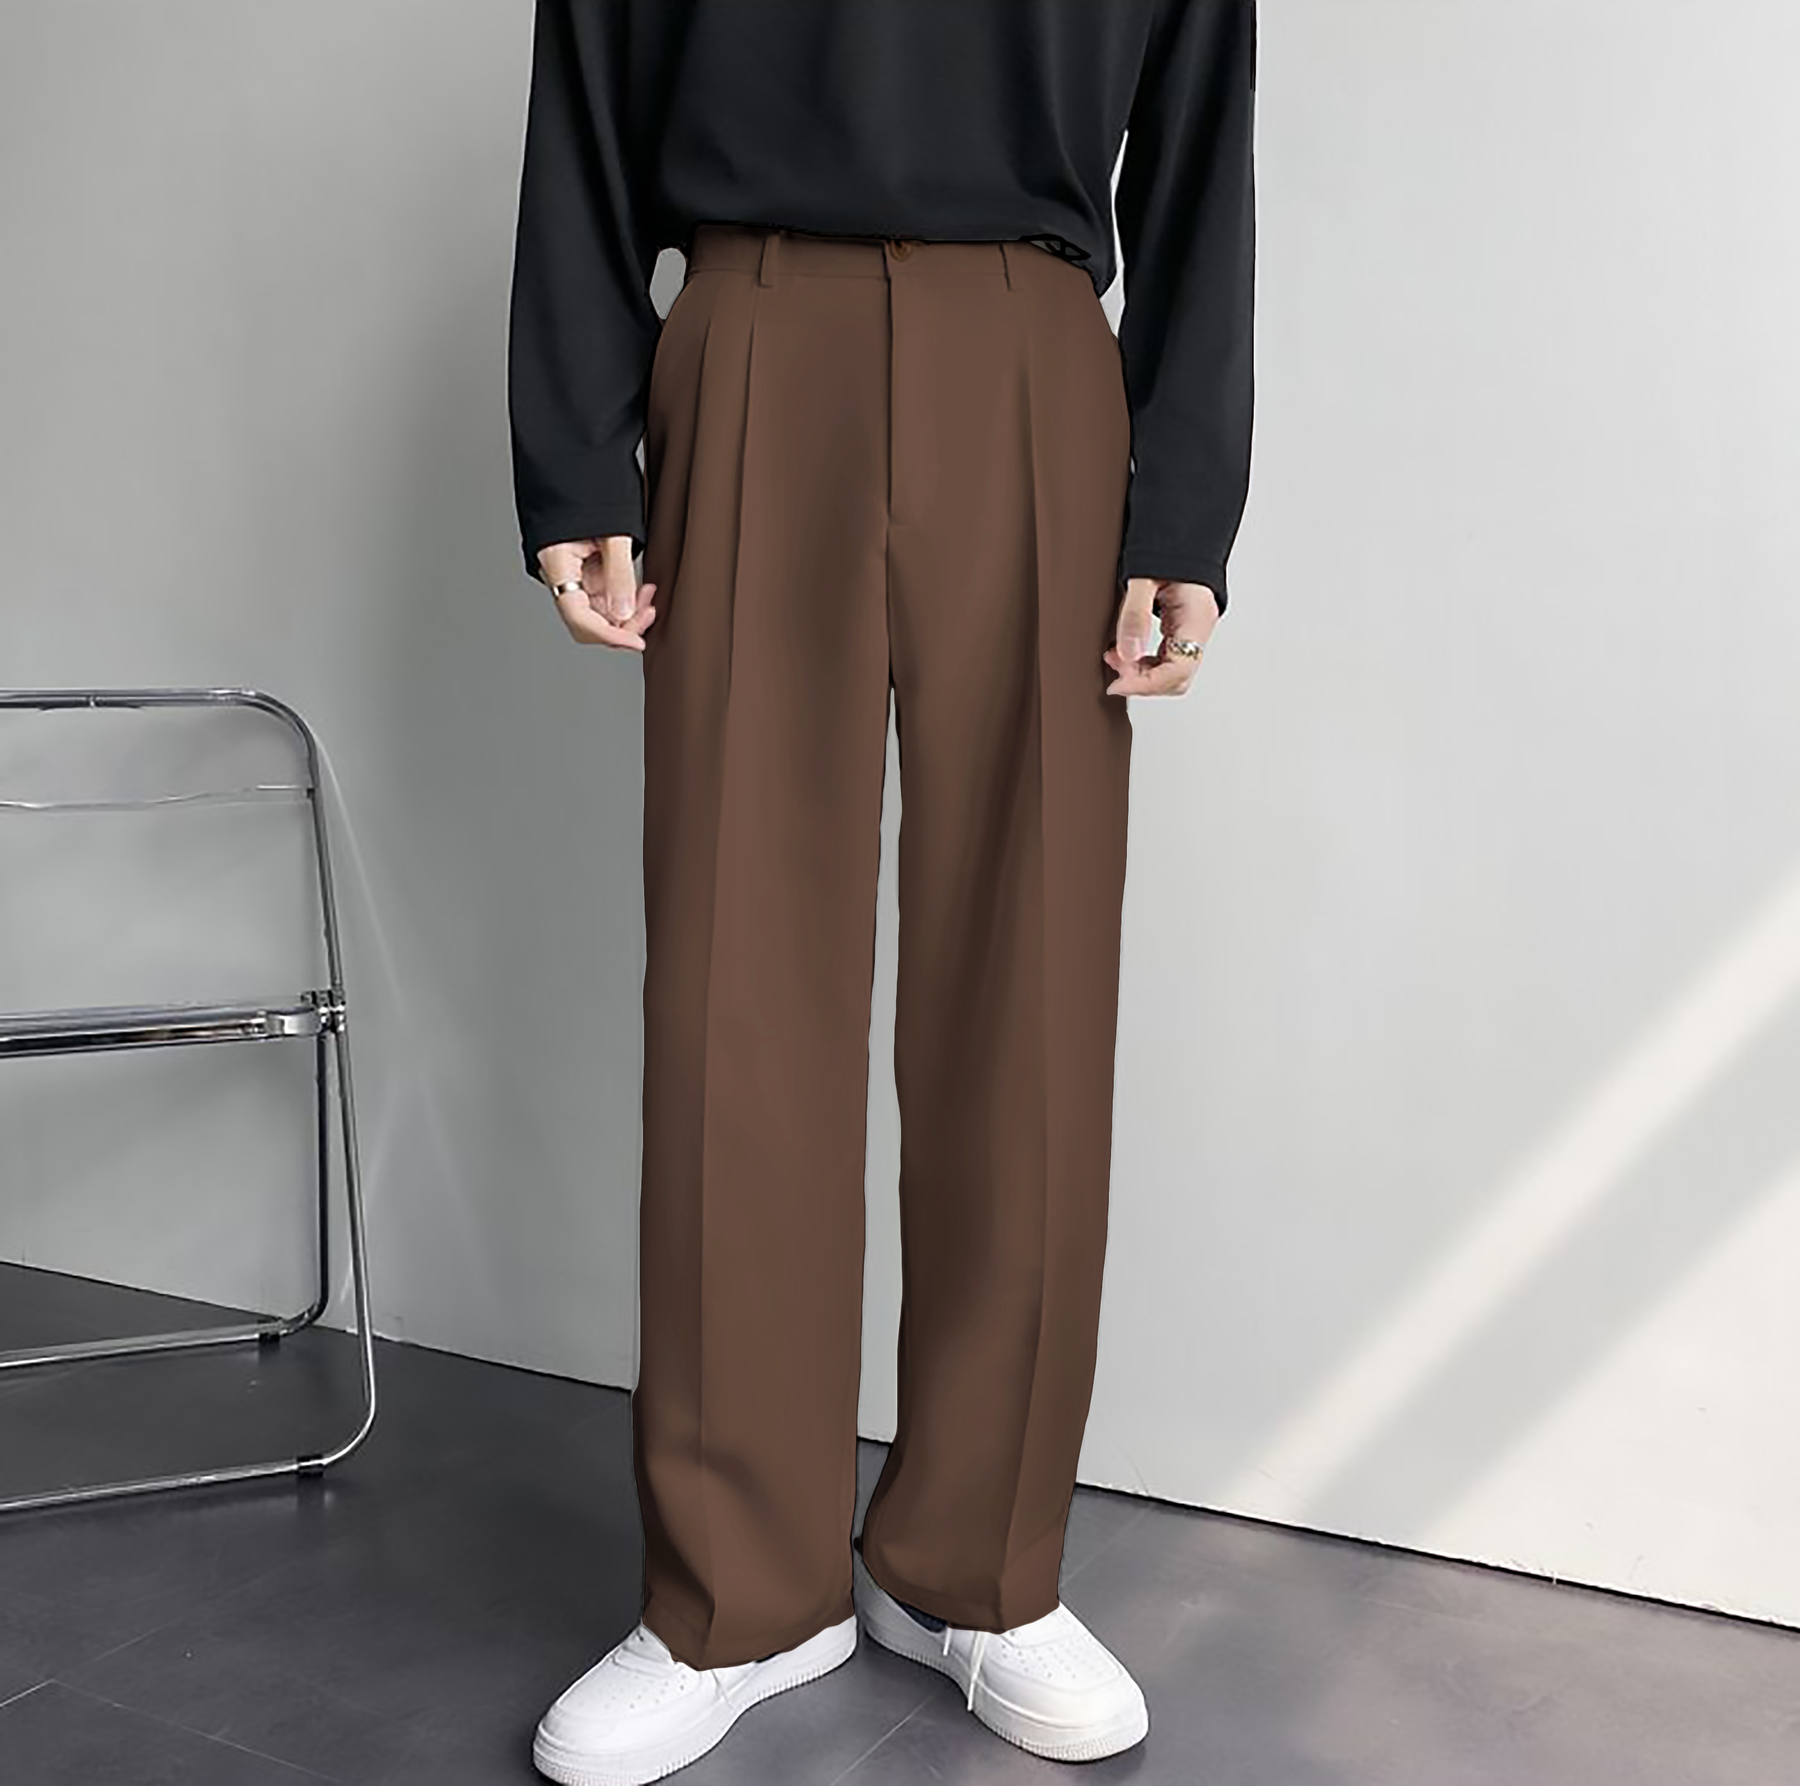 Latest ASOS Oversized Trousers arrivals  Men  1 products  FASHIOLAin